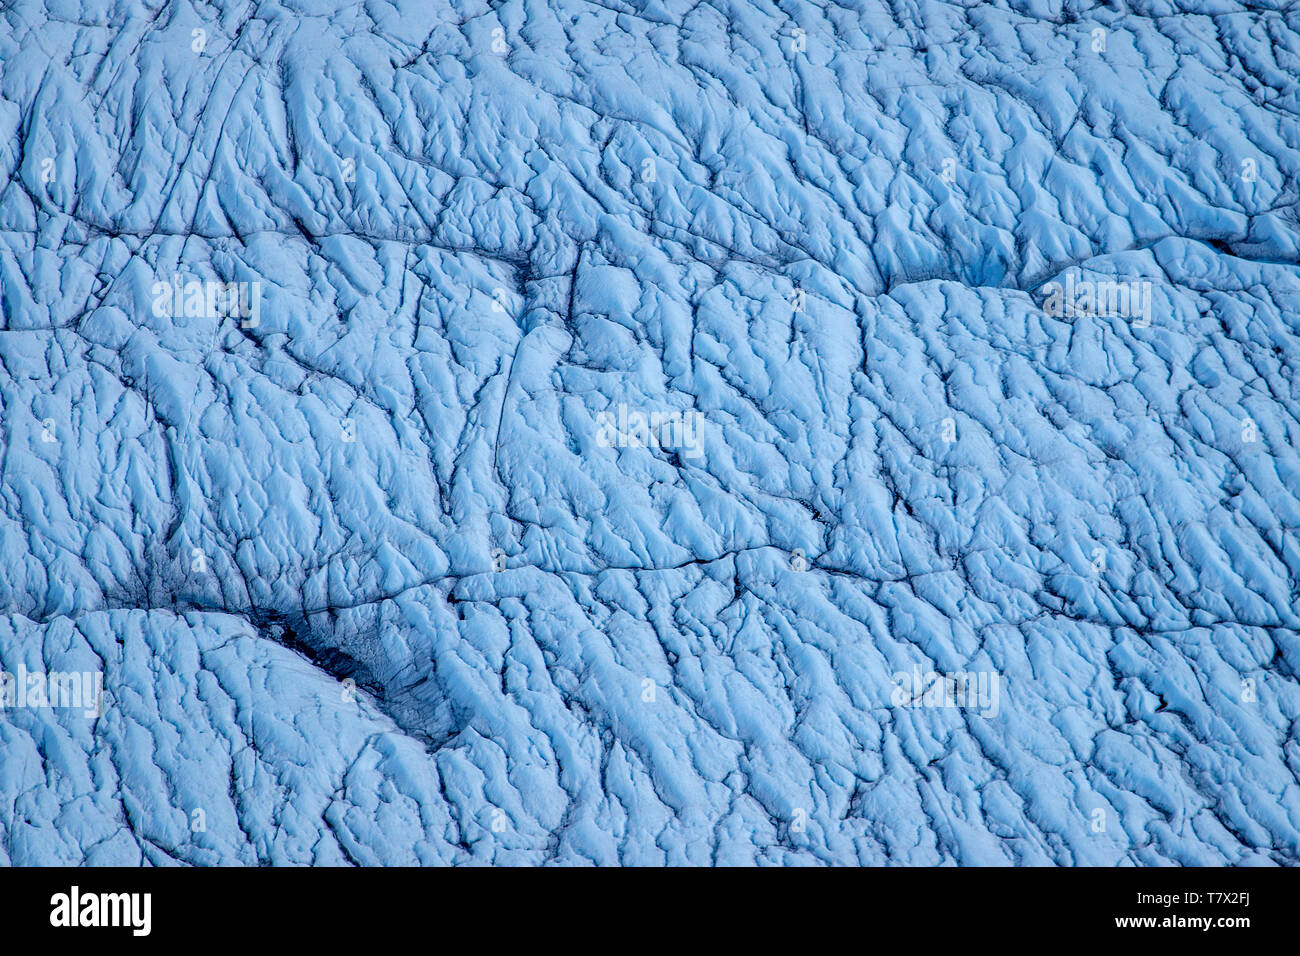 The Knik Glacier in Alaska. Lack of snow-cover expose the ash fallout from the nearby Redoubt Volcano, reducing the albedo effect. There are thousands of glaciers in Alaska, and at least 616 of them are named. Together, they are losing 75 billion tons of ice each year due to melting. That figure is likely to increase in future years. May 2015 was the hottest in 91 years. The blue color is naturally occuring, but is enhanced by underexposing the image. Stock Photo